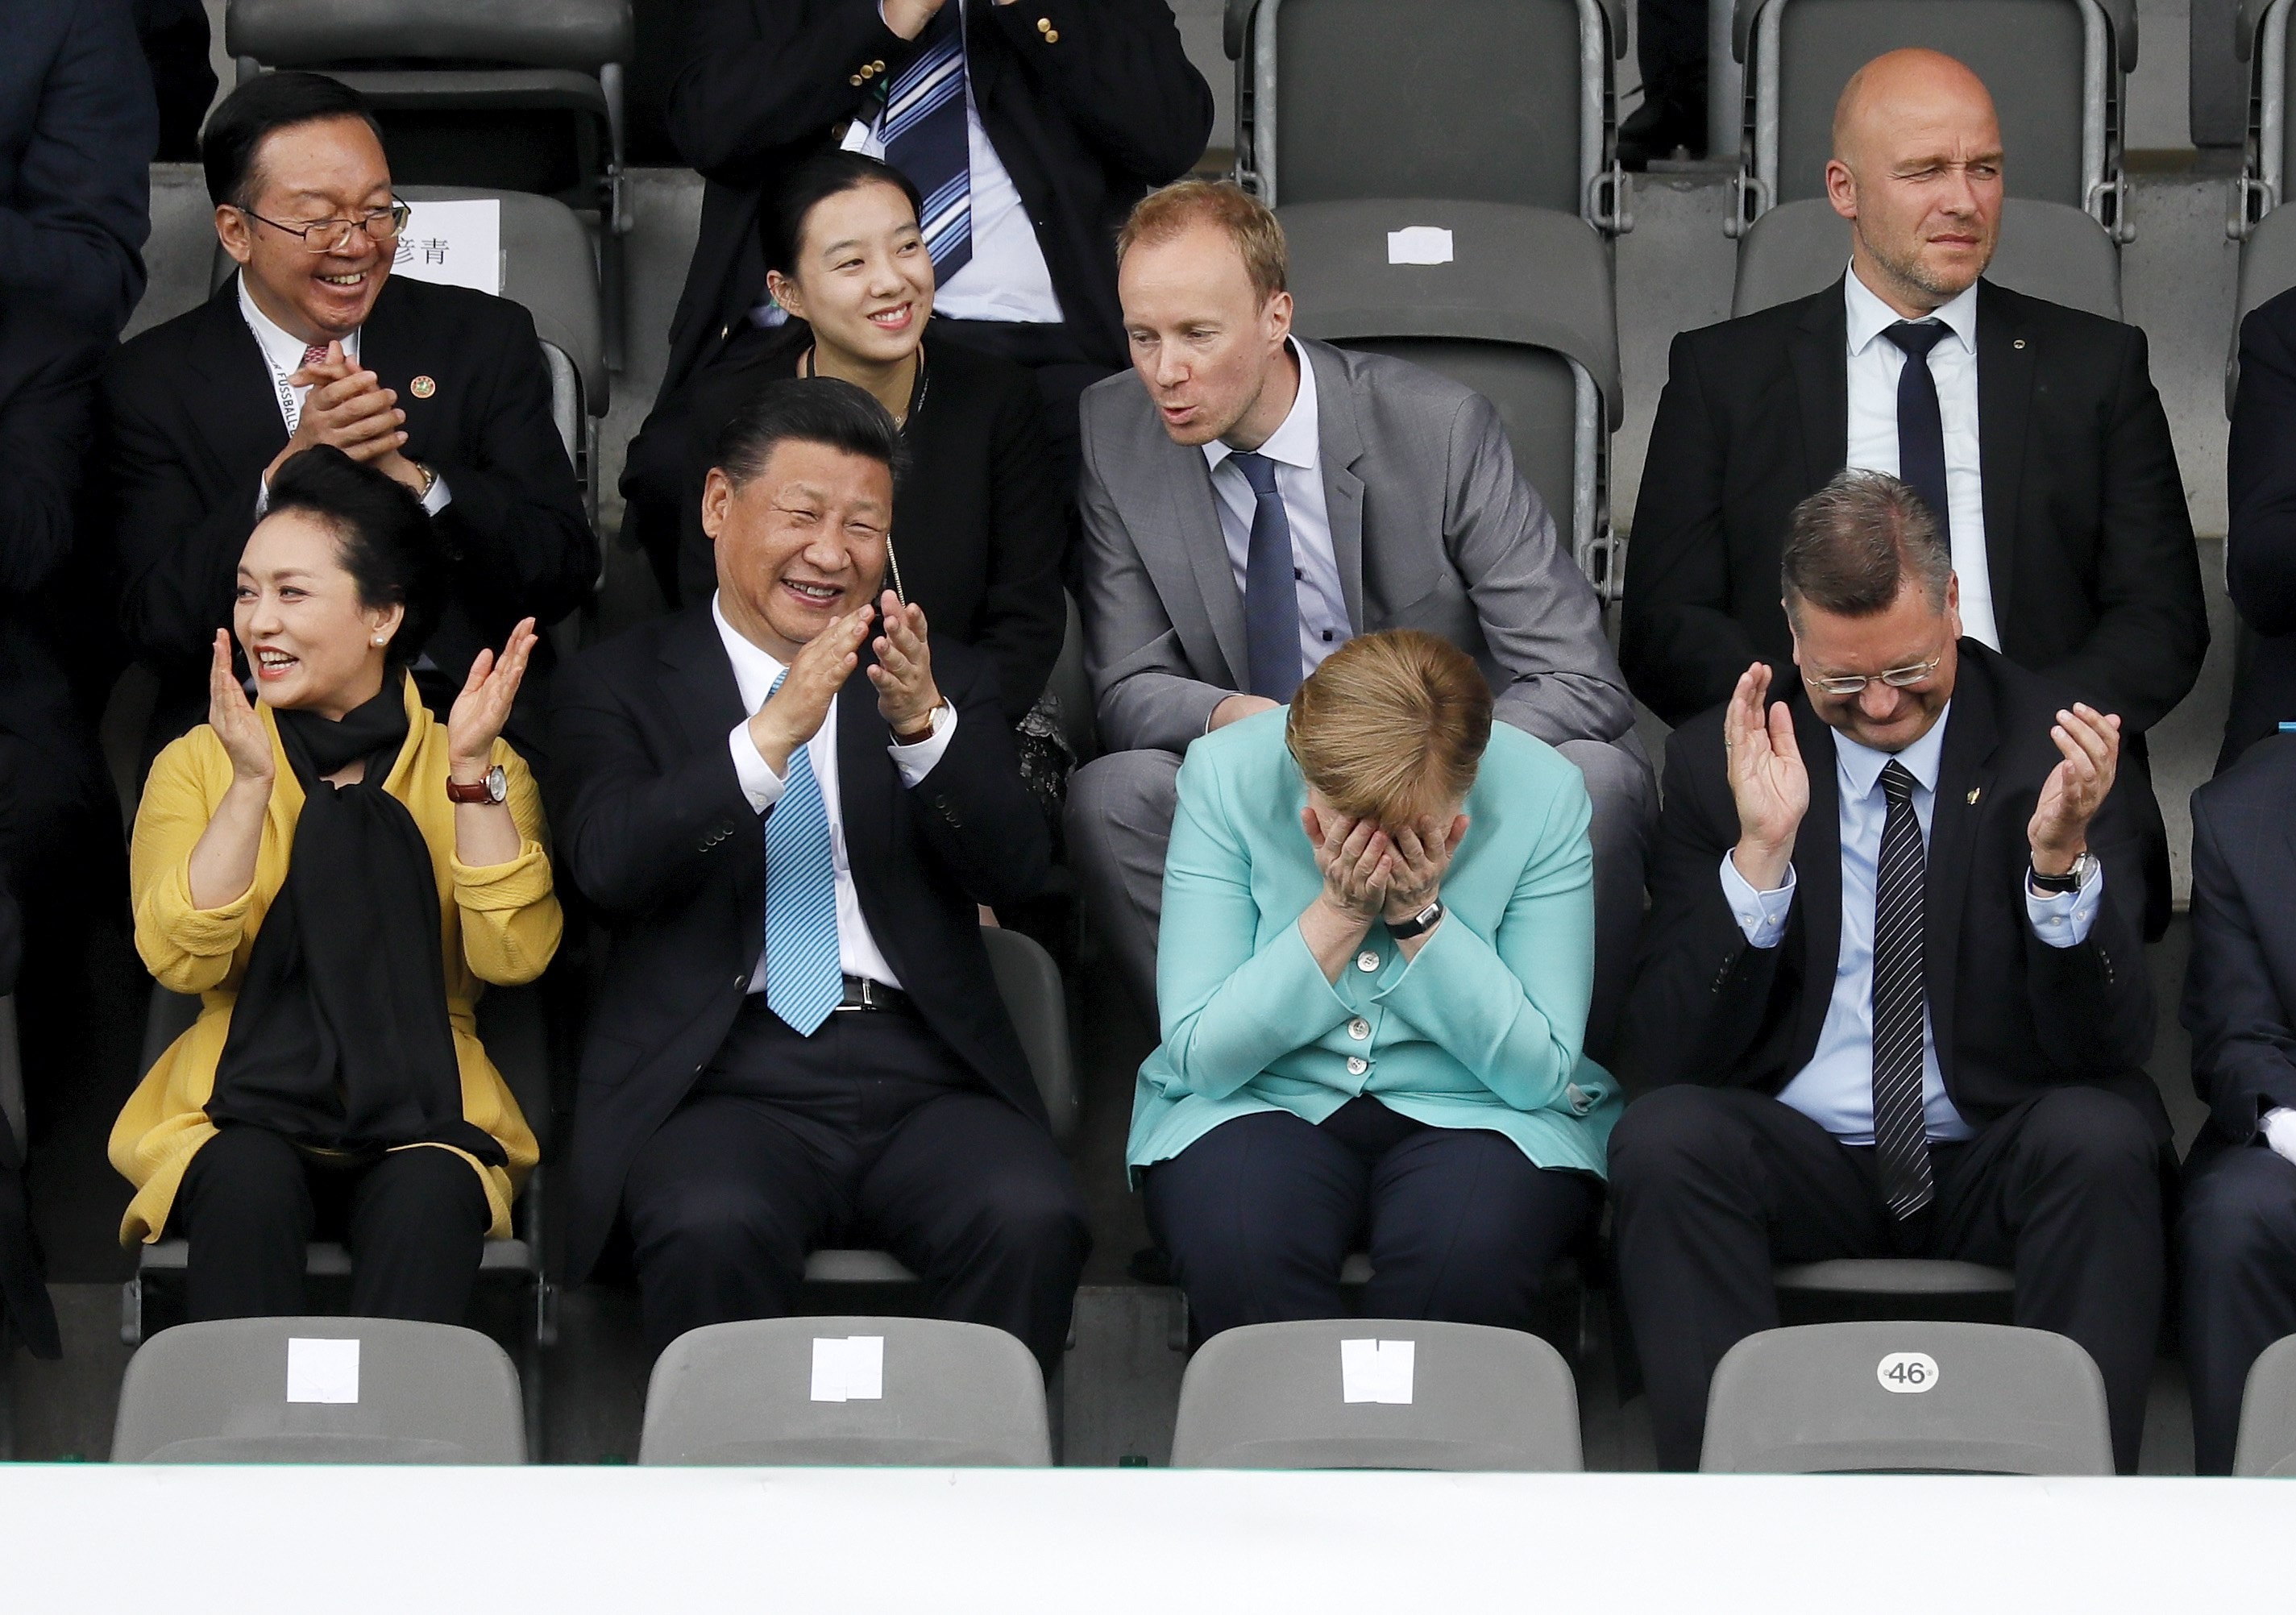 Xi Jinping cracks an unusually large grin as he watches the Germany-China under-12 match with his wife Peng Liyuan and German chancellor Angela Merkel. Photo: EPA